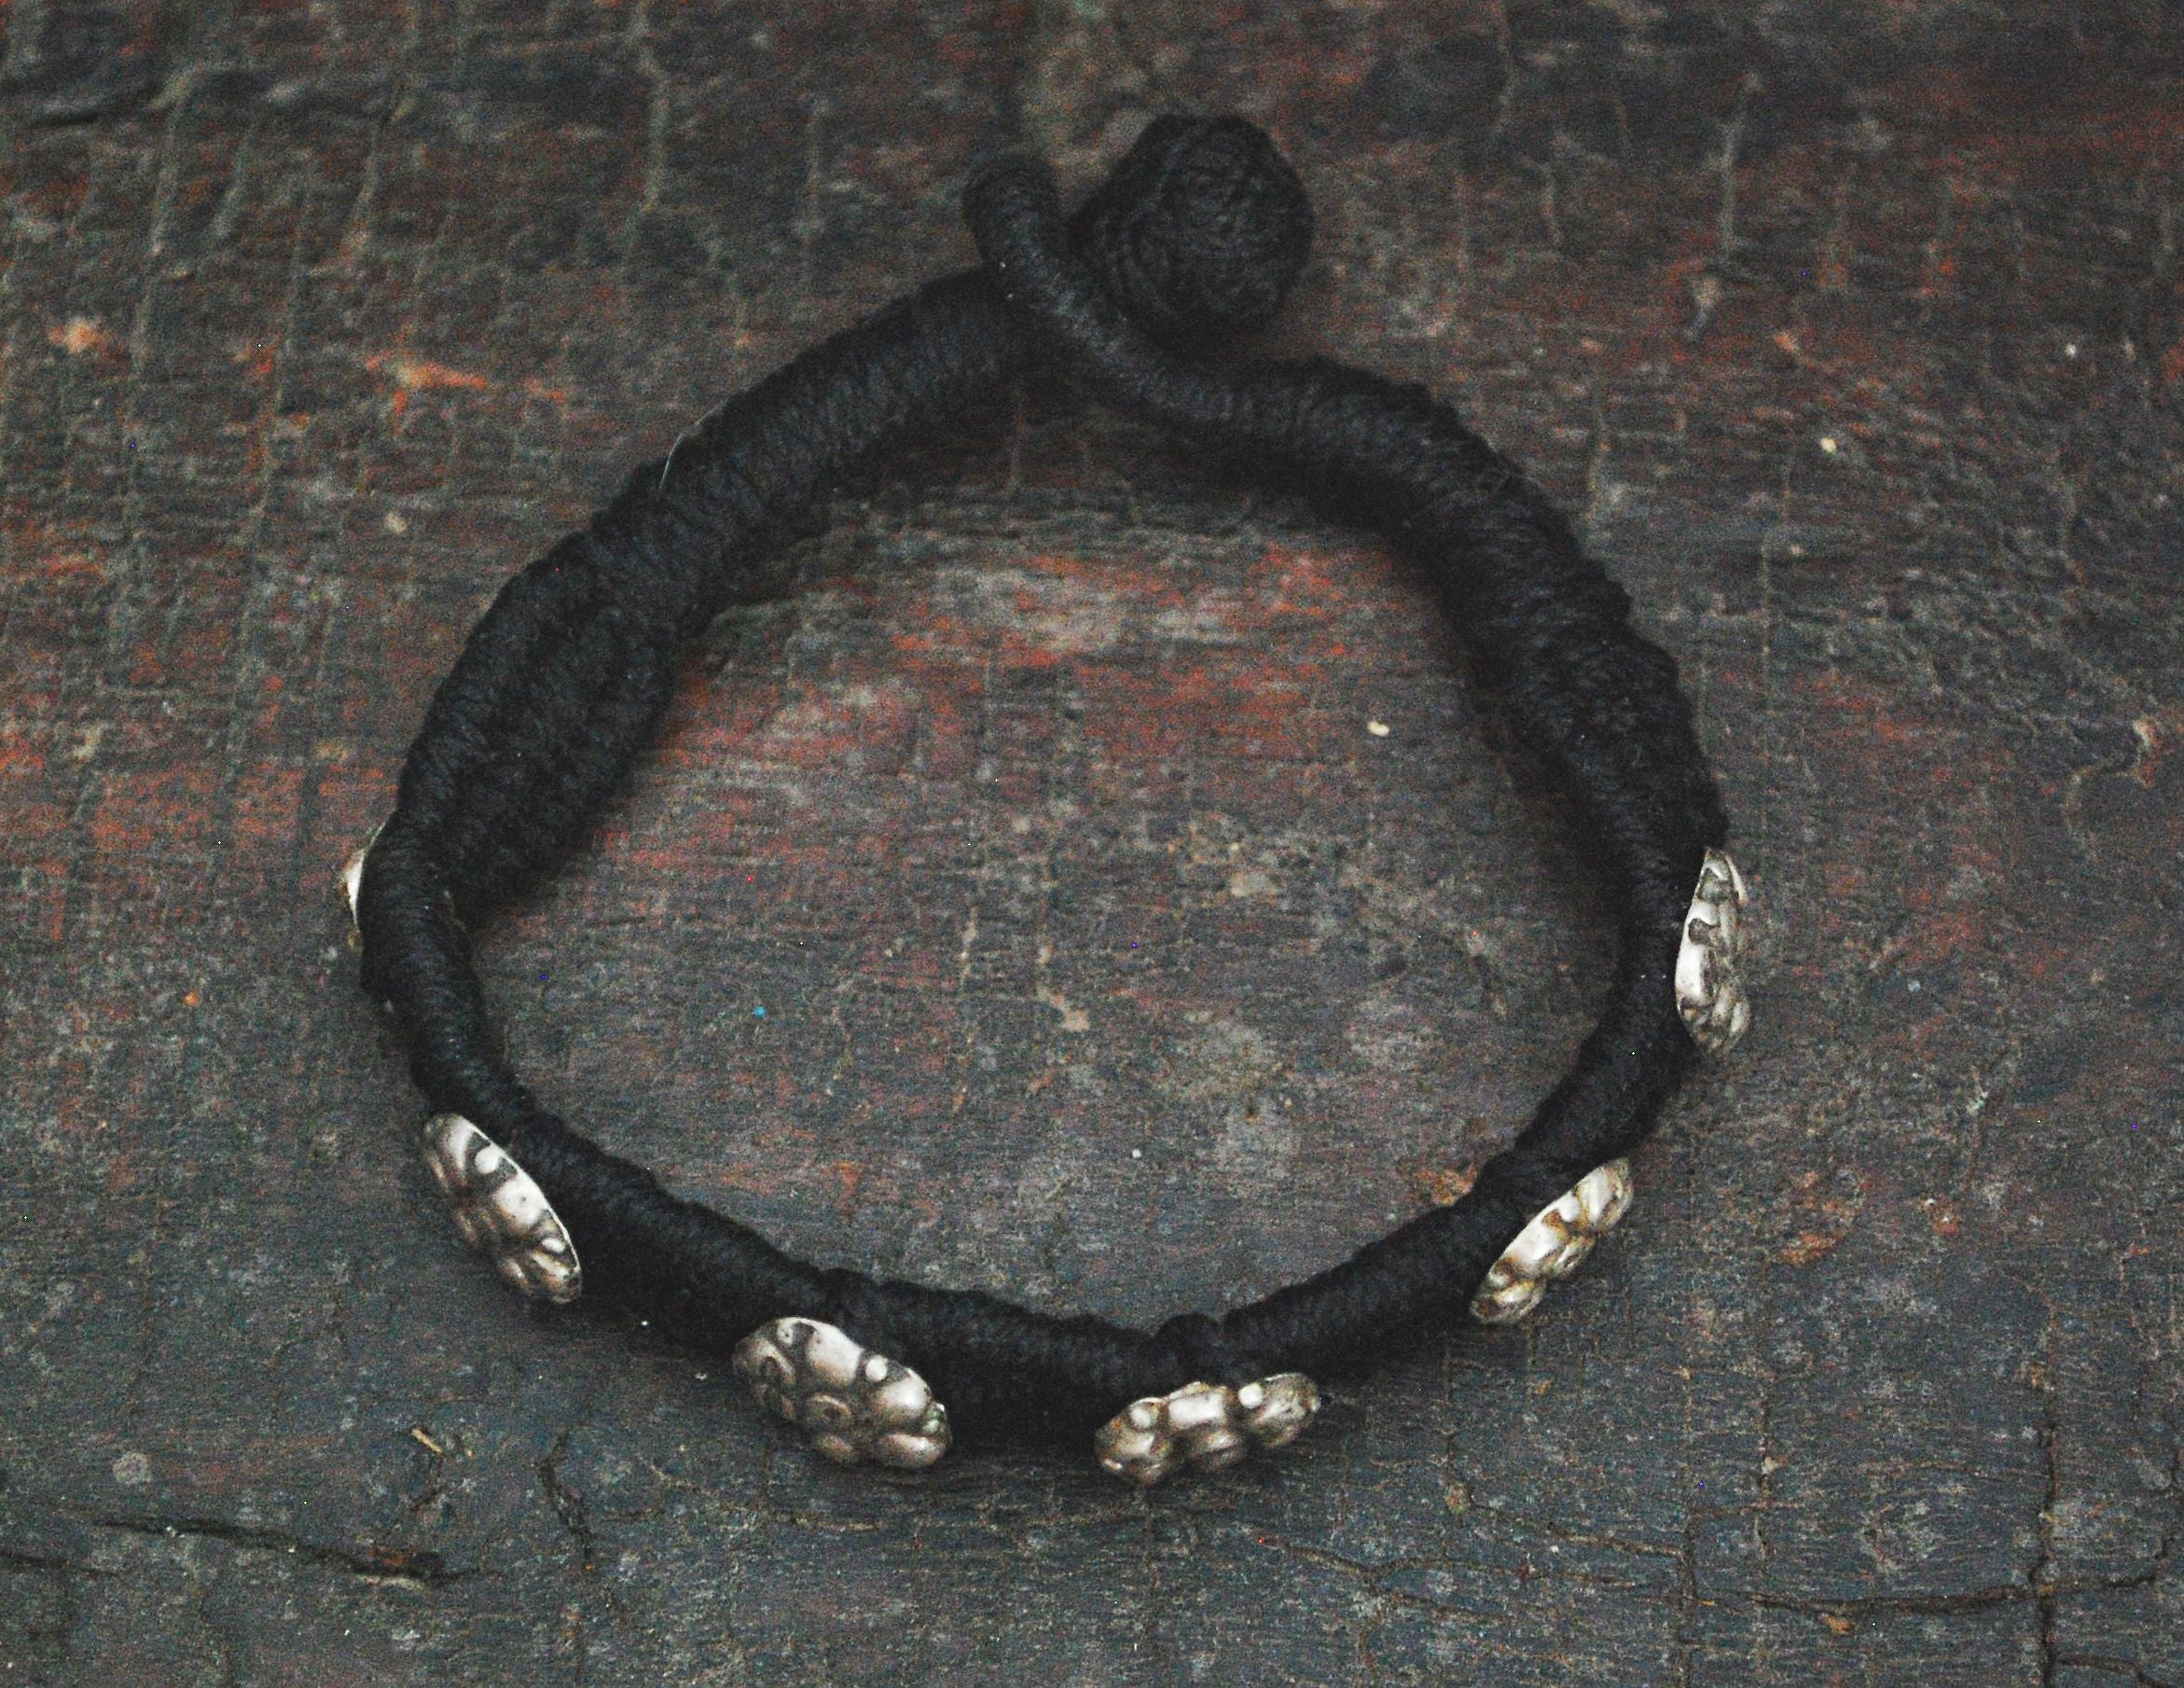 Tribal Rajasthani Cotton Bracelet with Silver Buttons